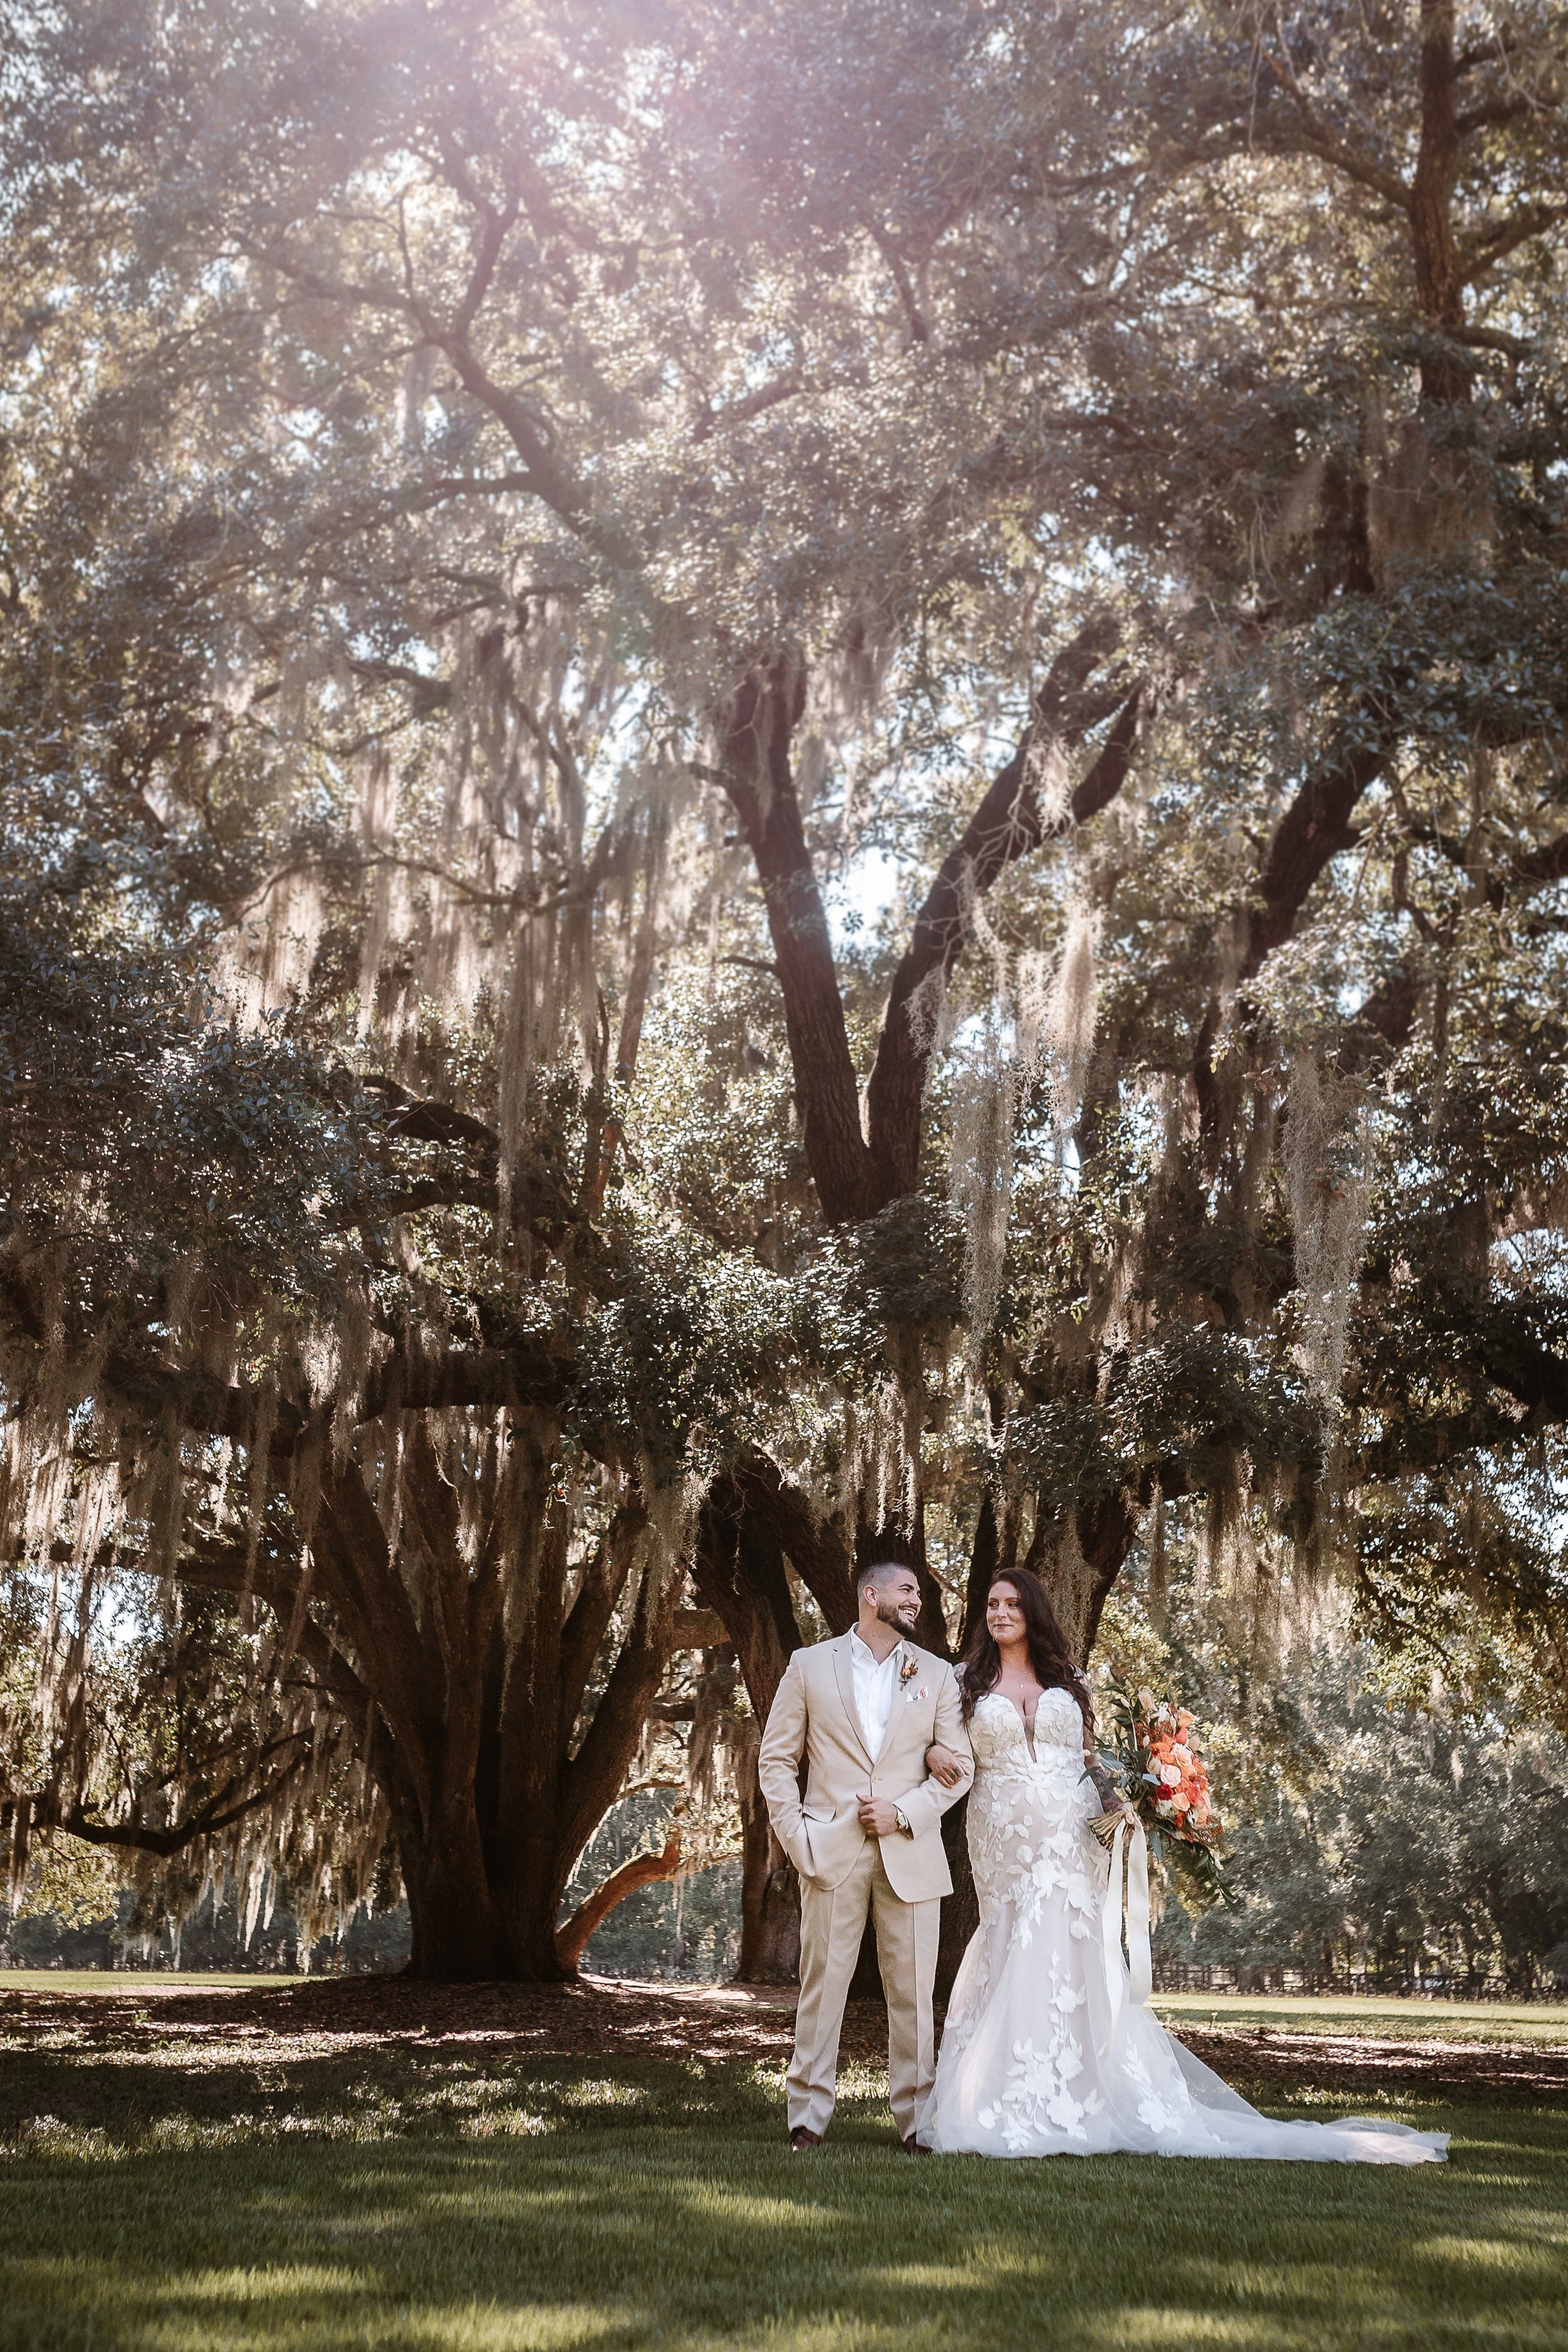 ivory-and-beau-blog-down-for-the-gown-real-bride-rebecca-ingram-wedding-dress-maggie-sottero-bridal-gown-strapless-wedding-dress-wedding-gown-savannah-bridal-shop-savannah-bridal-boutique-savannah-georgia-Annie & Cam Wedding-249.jpg